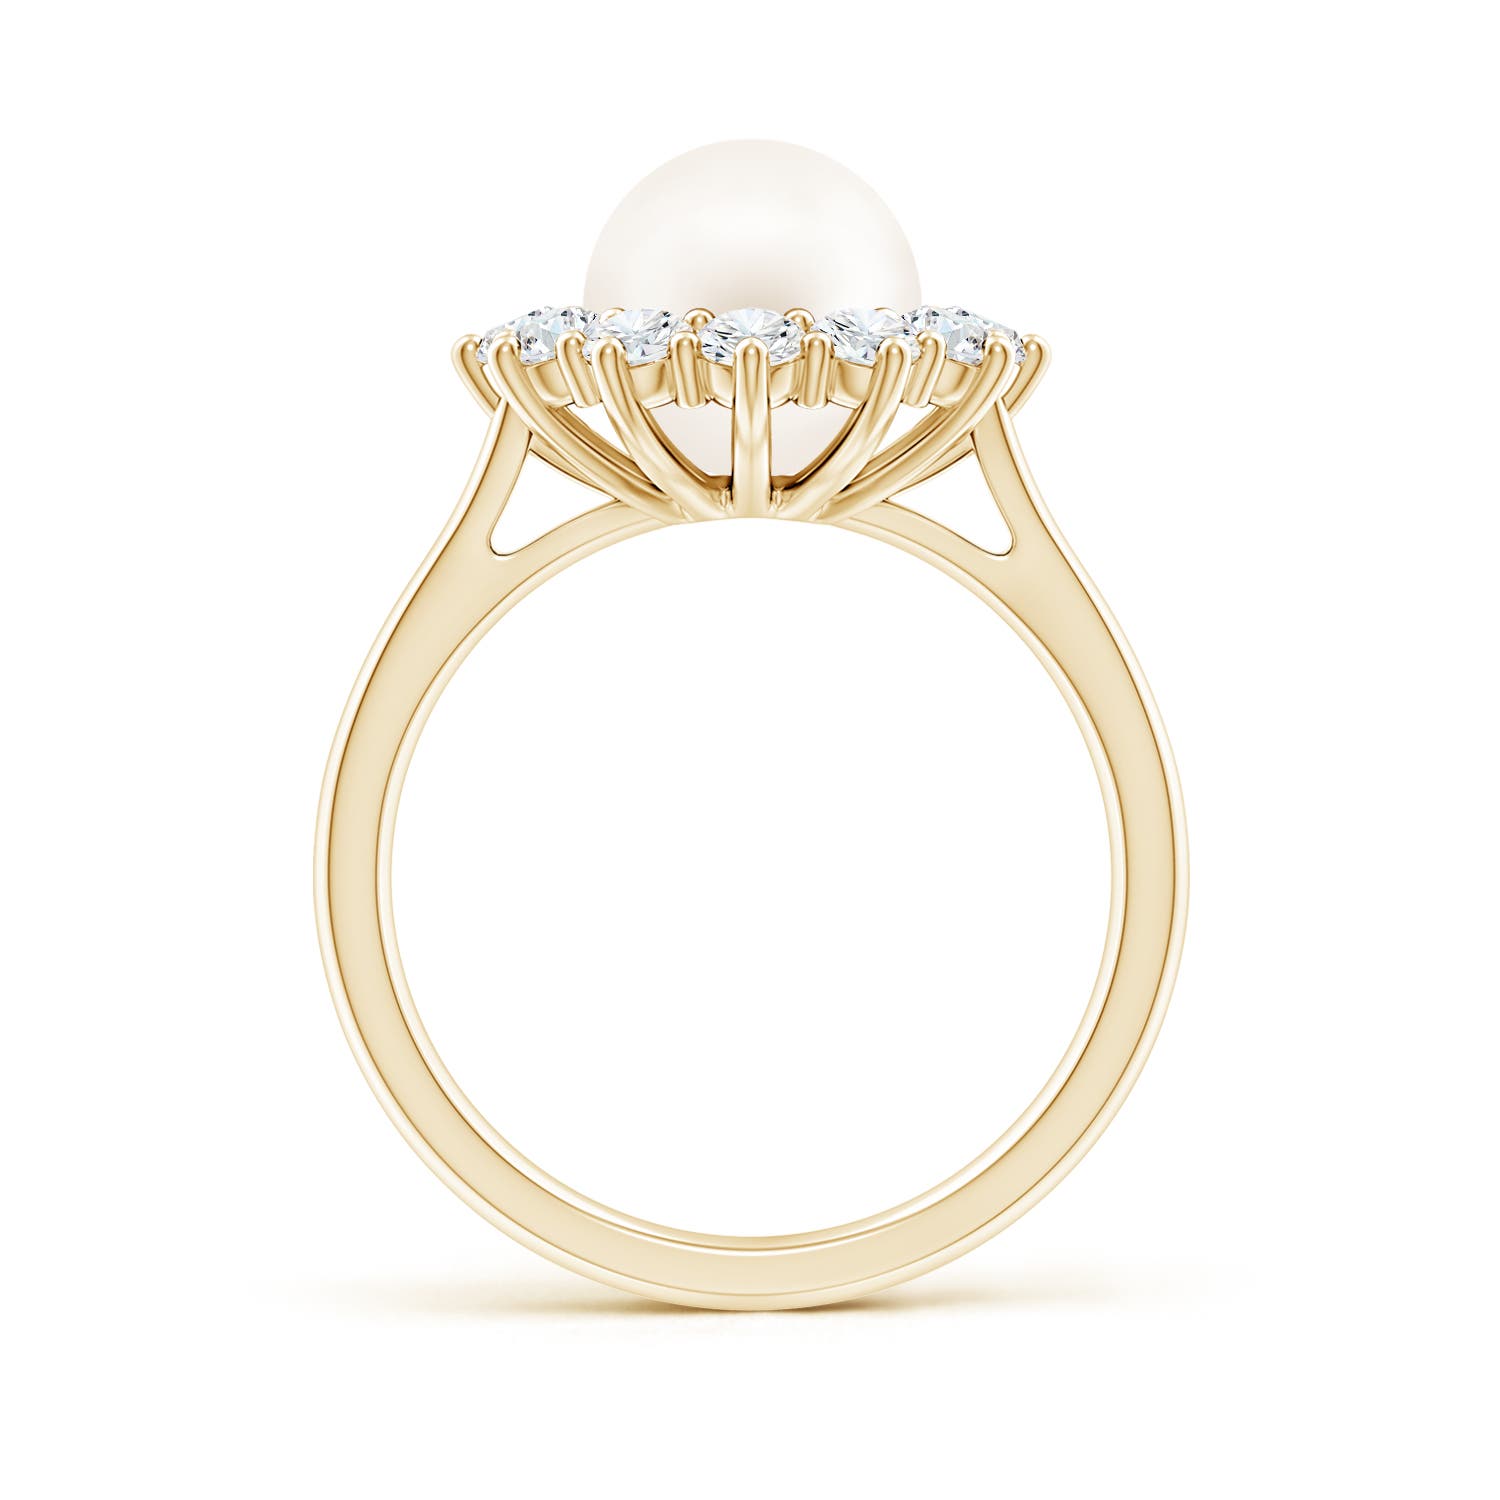 AA / 4.4 CT / 14 KT Yellow Gold